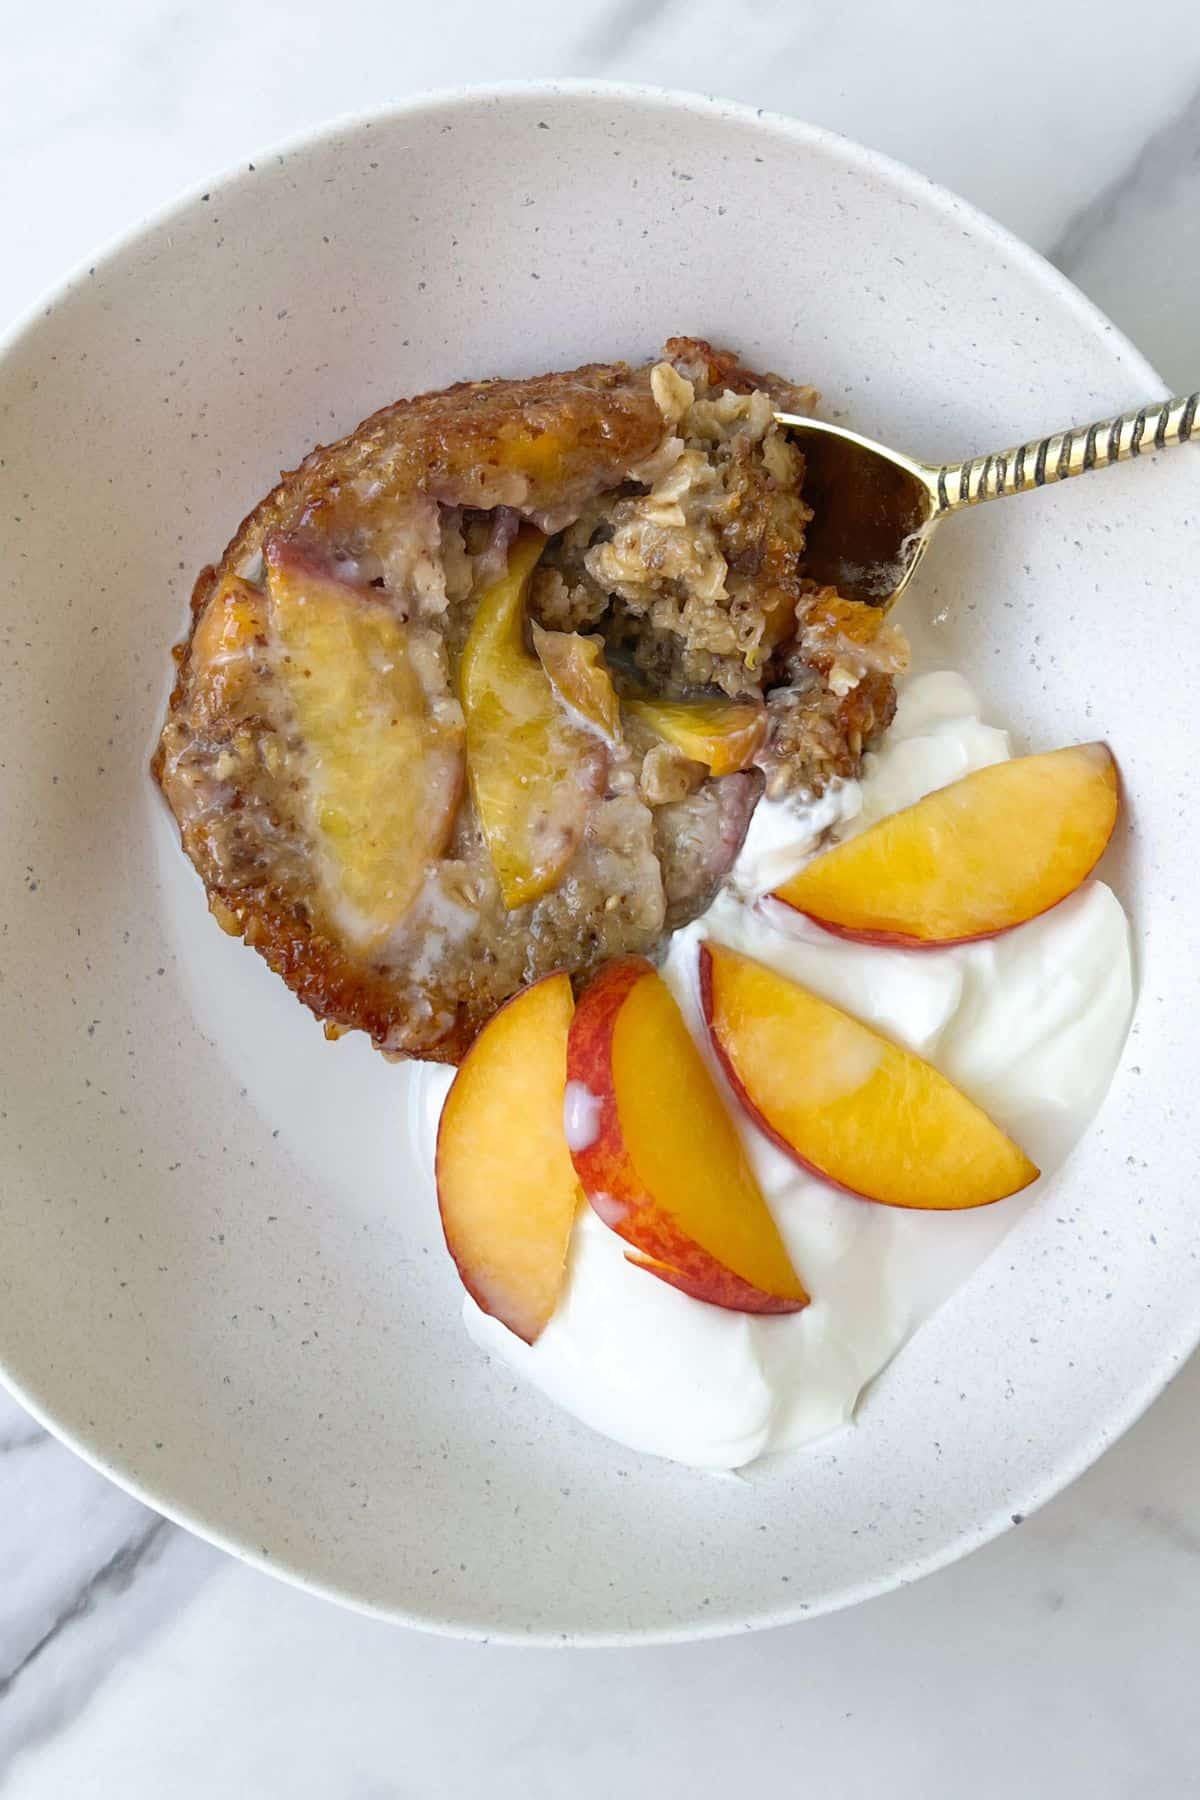 Peach Baked Oatmeal with Cream in a bowl.